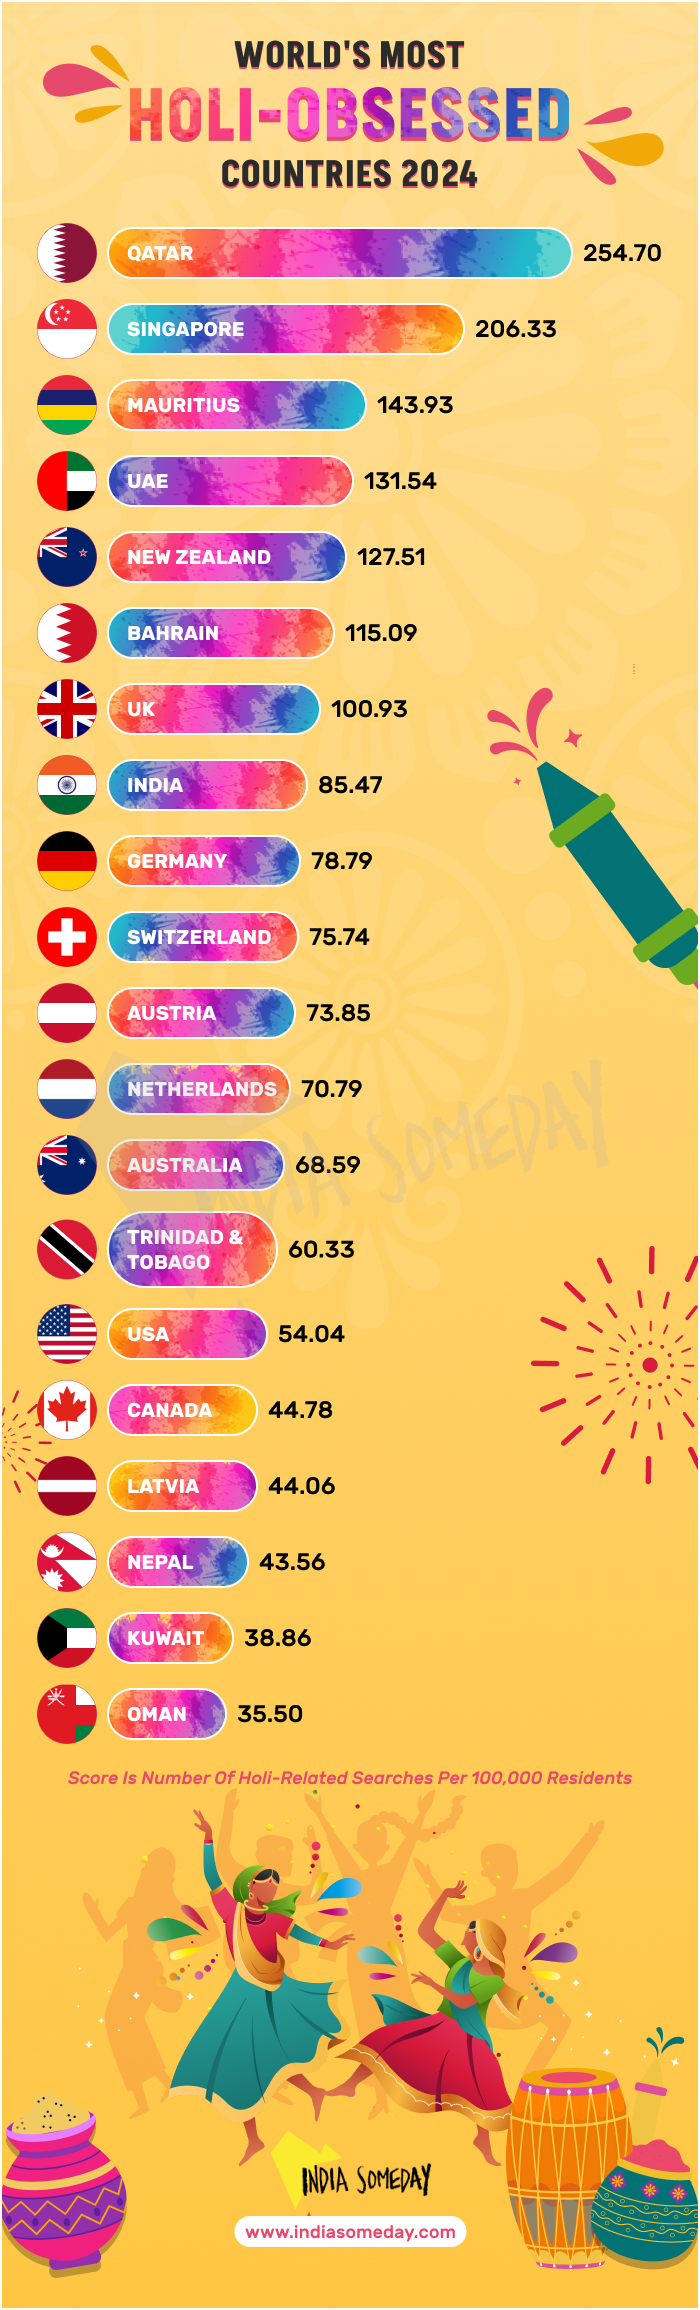 Infographic - World's Most Holi-Obsessed Countries 2024